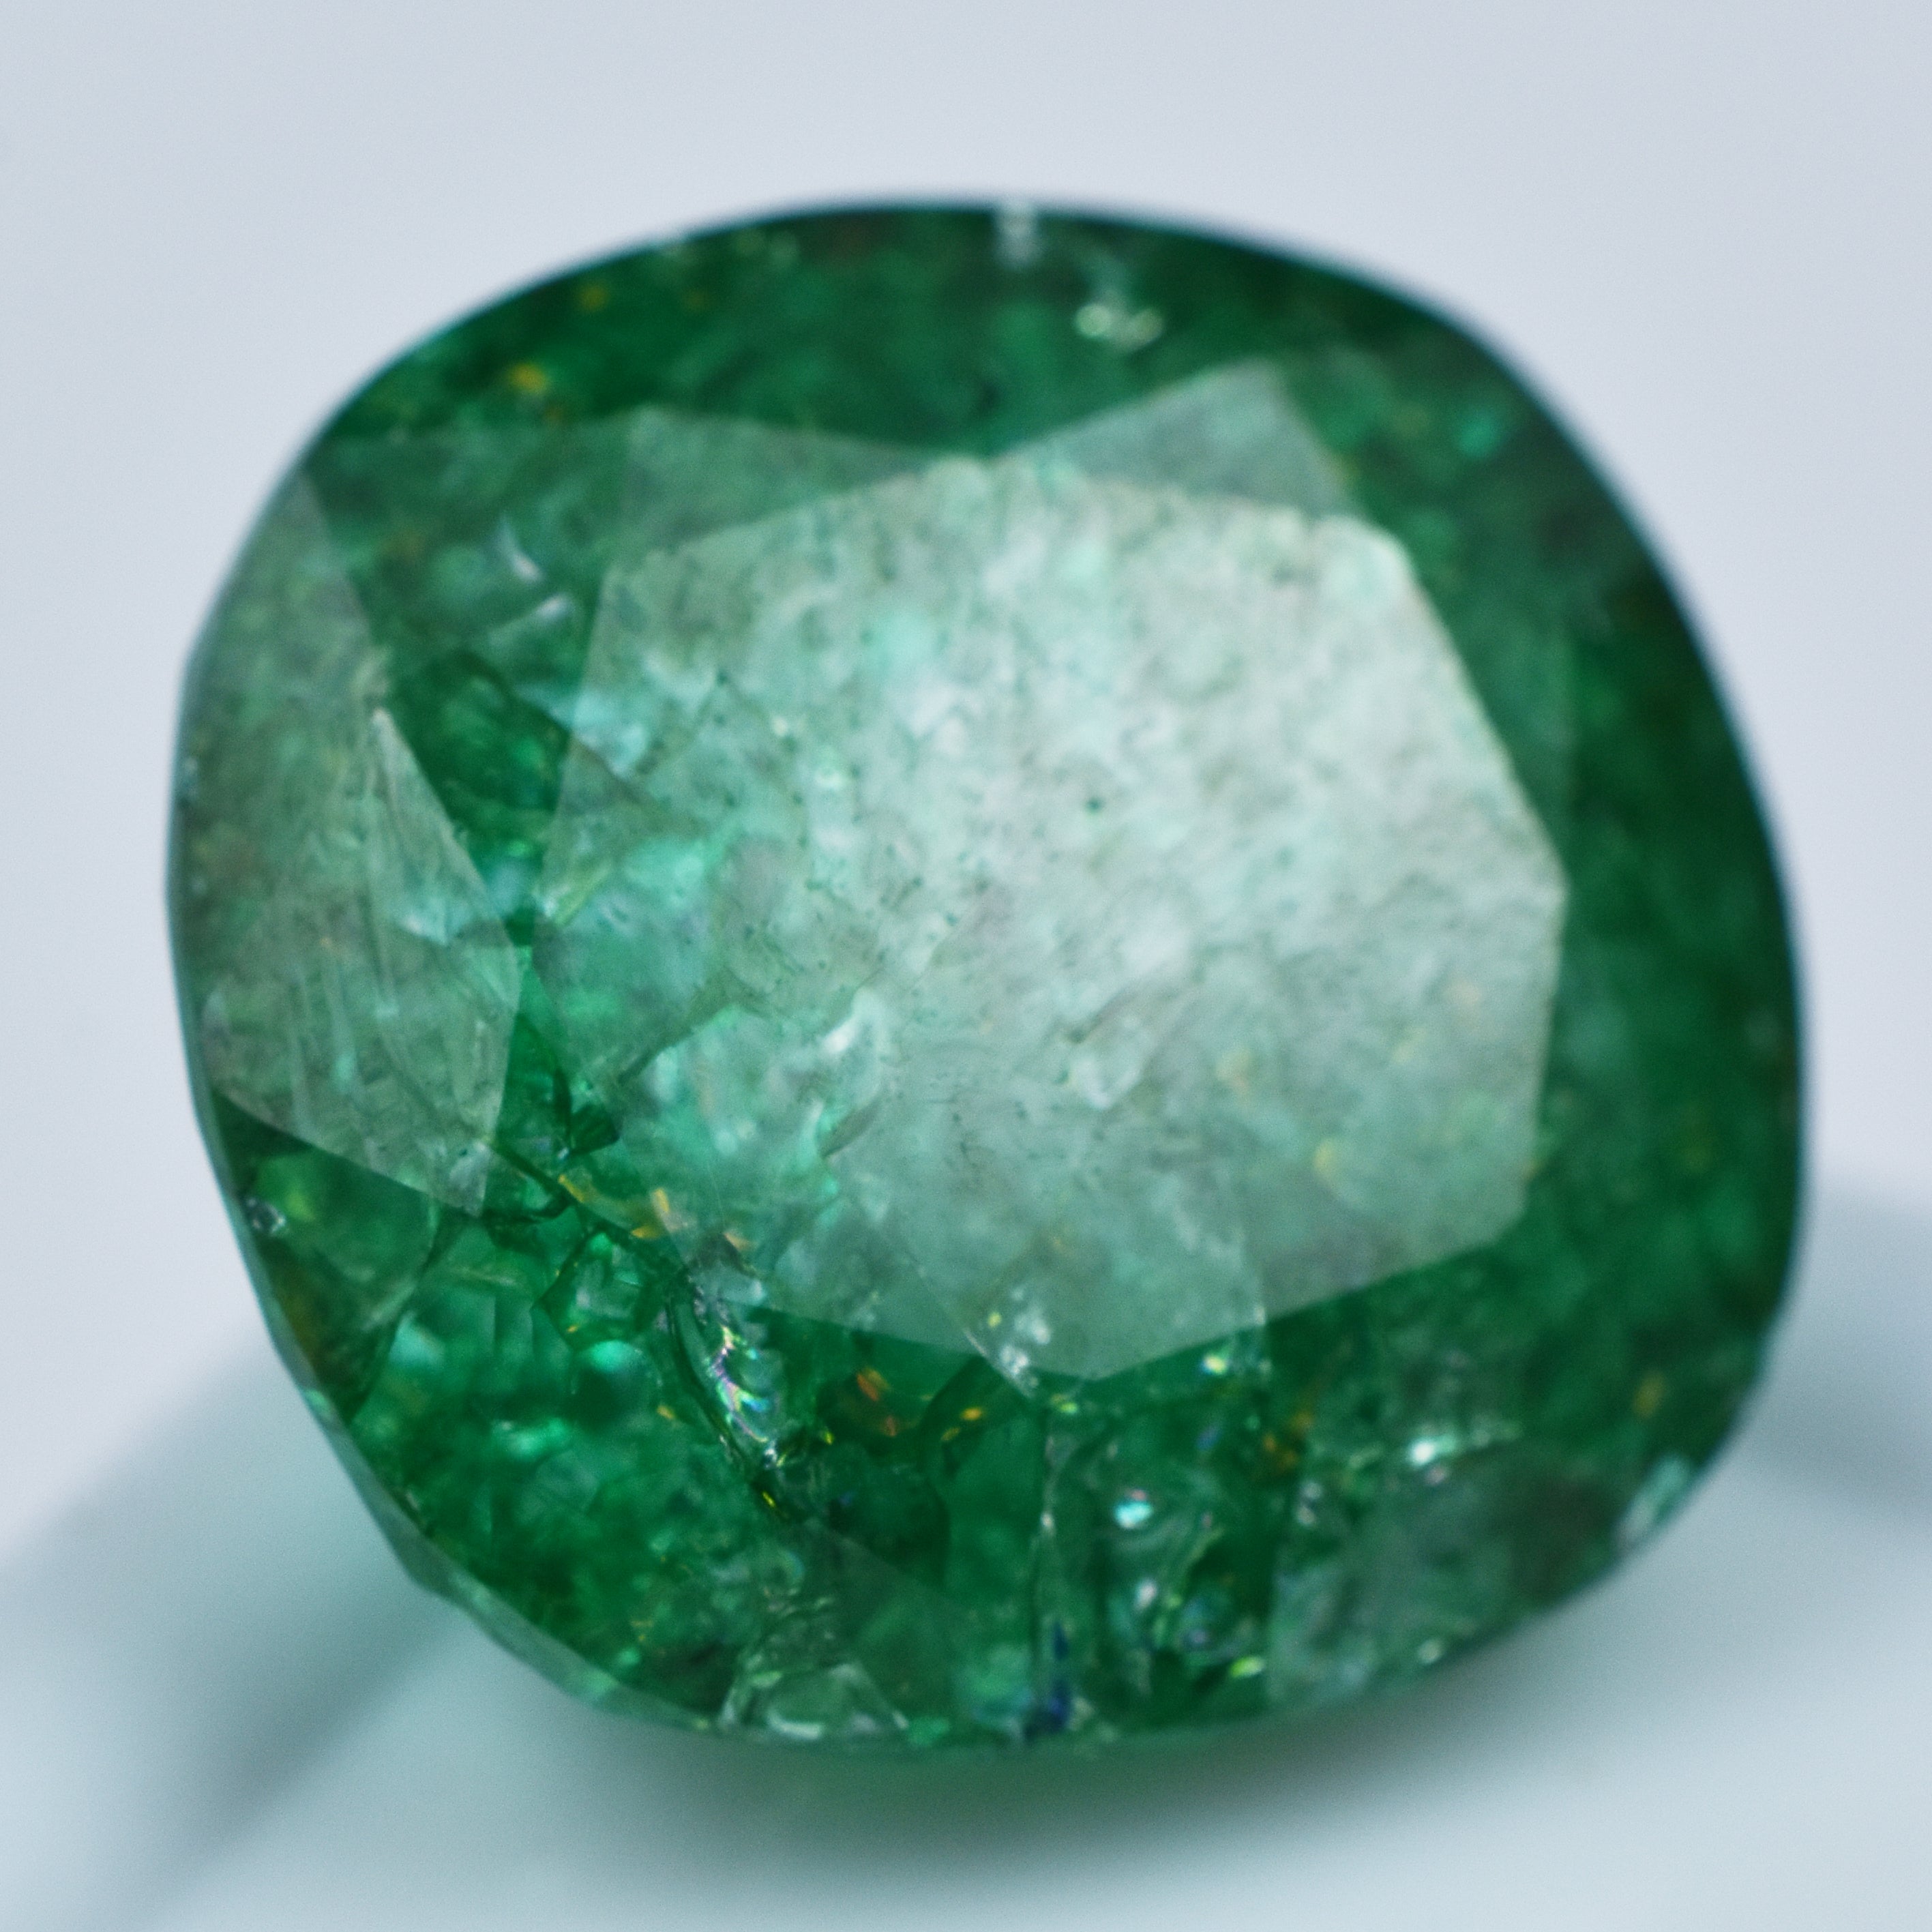 "EMERALD " Beautiful Green Emerald 8.25 Carat Square Cushion Cut Green Emerald Natural Certified Loose Gemstone | Surprise Gift For Wife | Free Delivery Free Gift